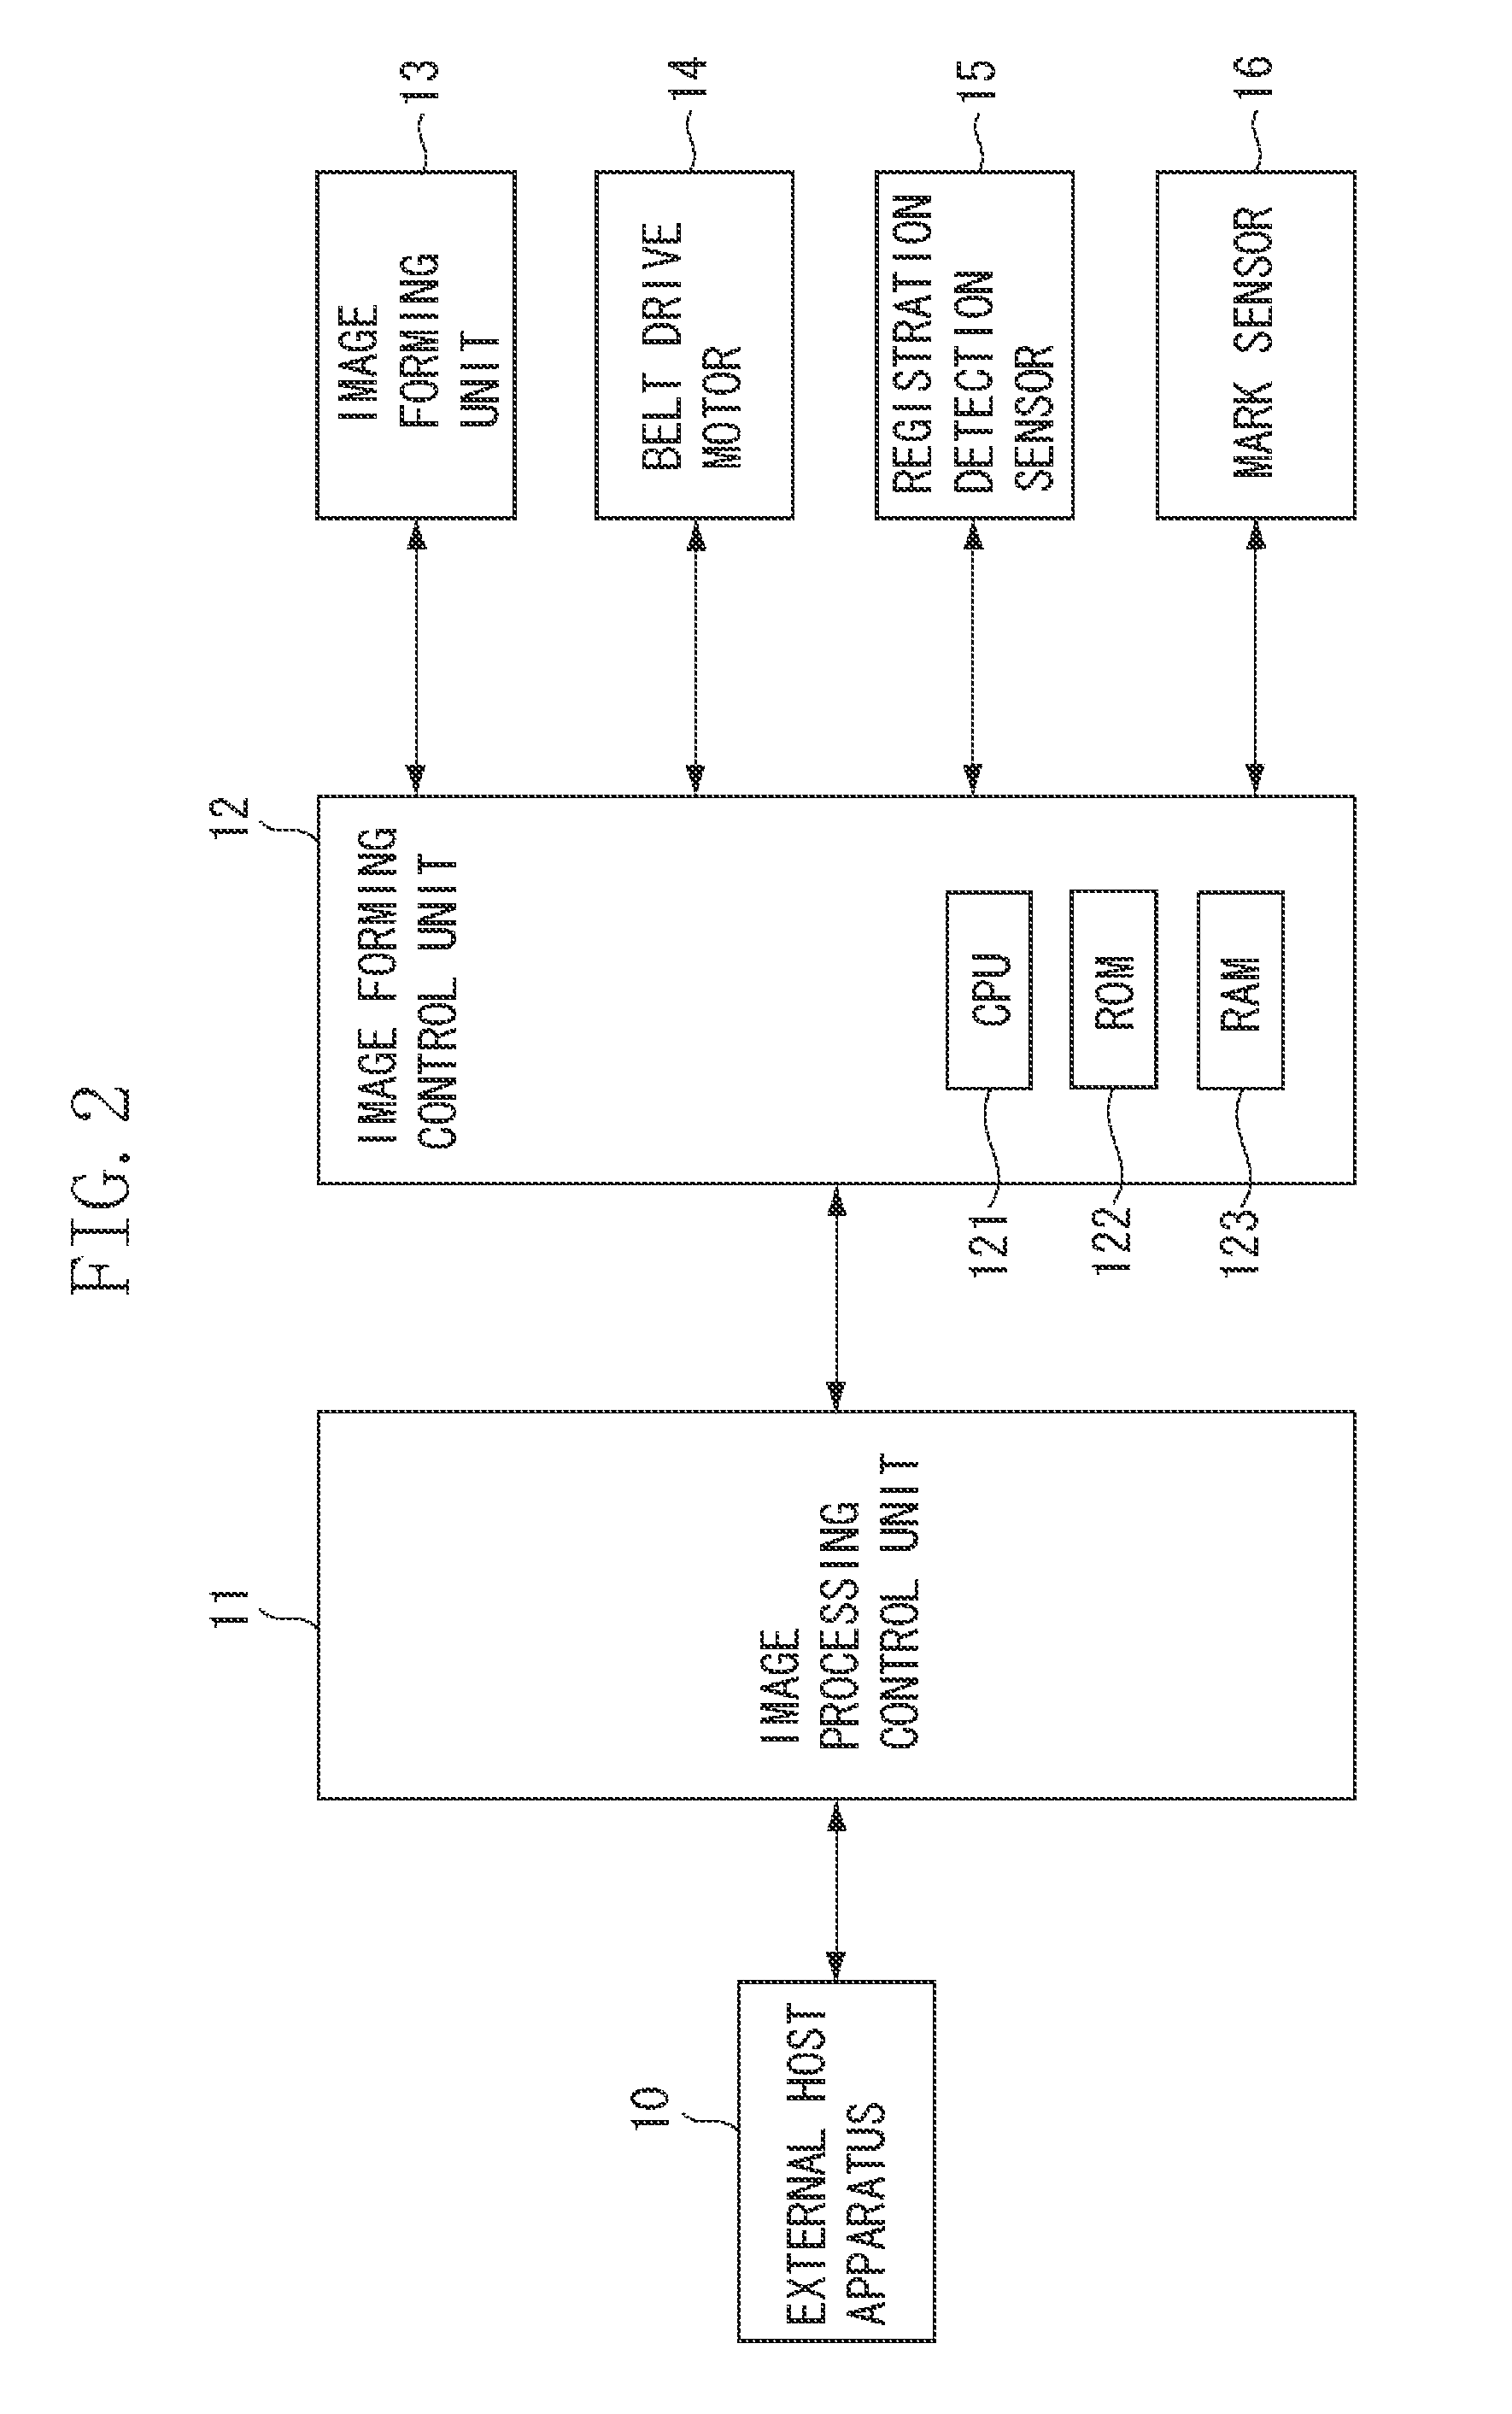 Image forming apparatus for setting a velocity difference between a photosensitive drum and an intermediate transfer belt